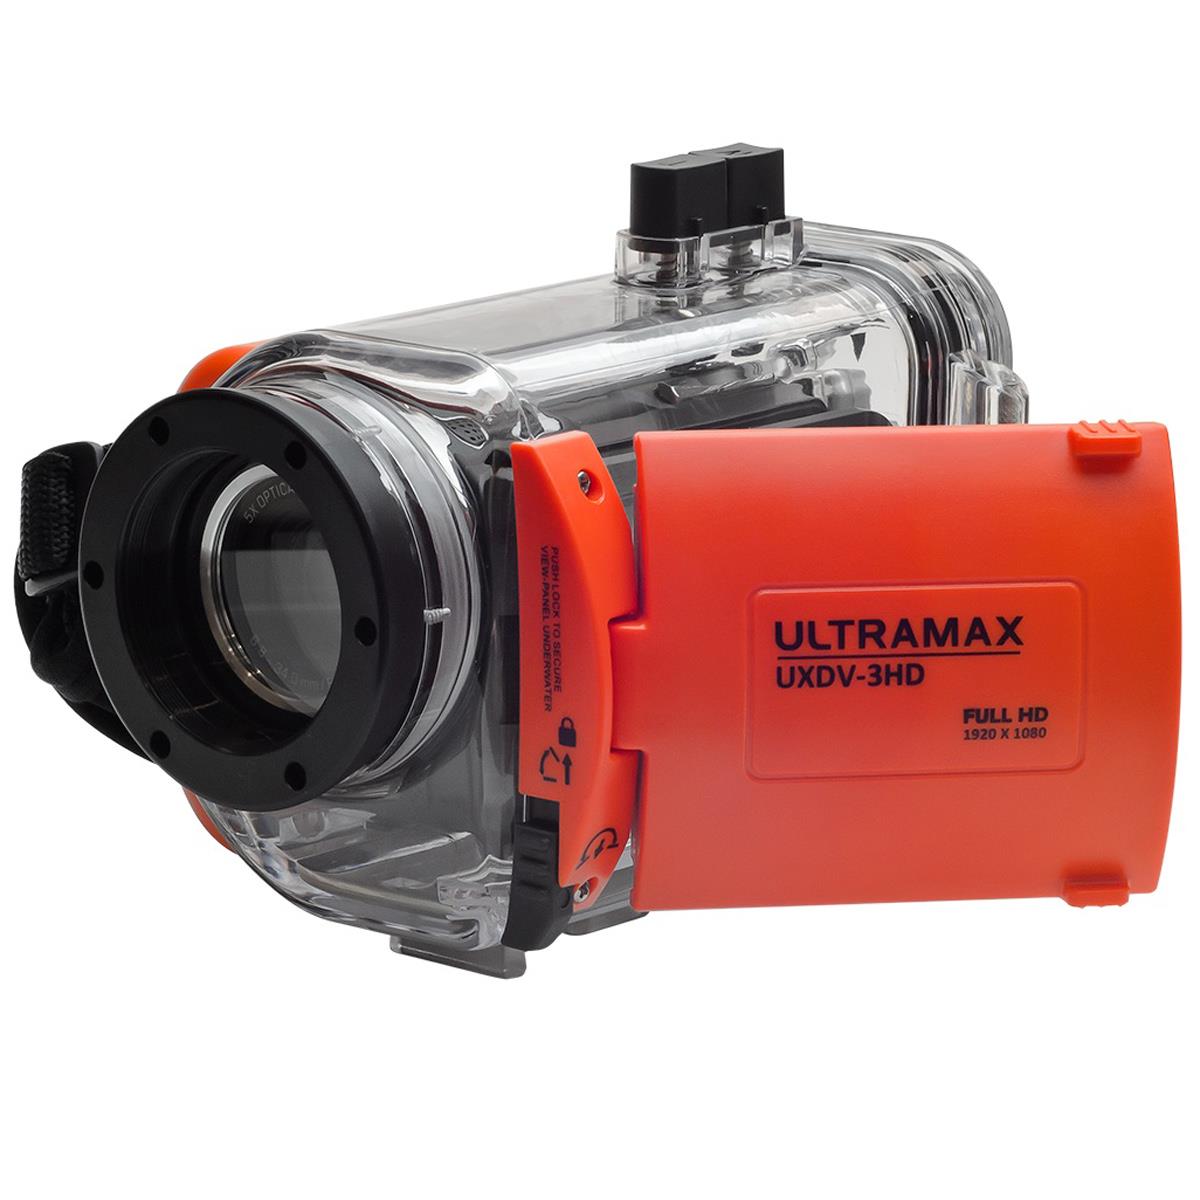 Image of CAO Group ULTRAMAX UXDV-3HD-DIVE 1080p Digital Video Camera Dive Package